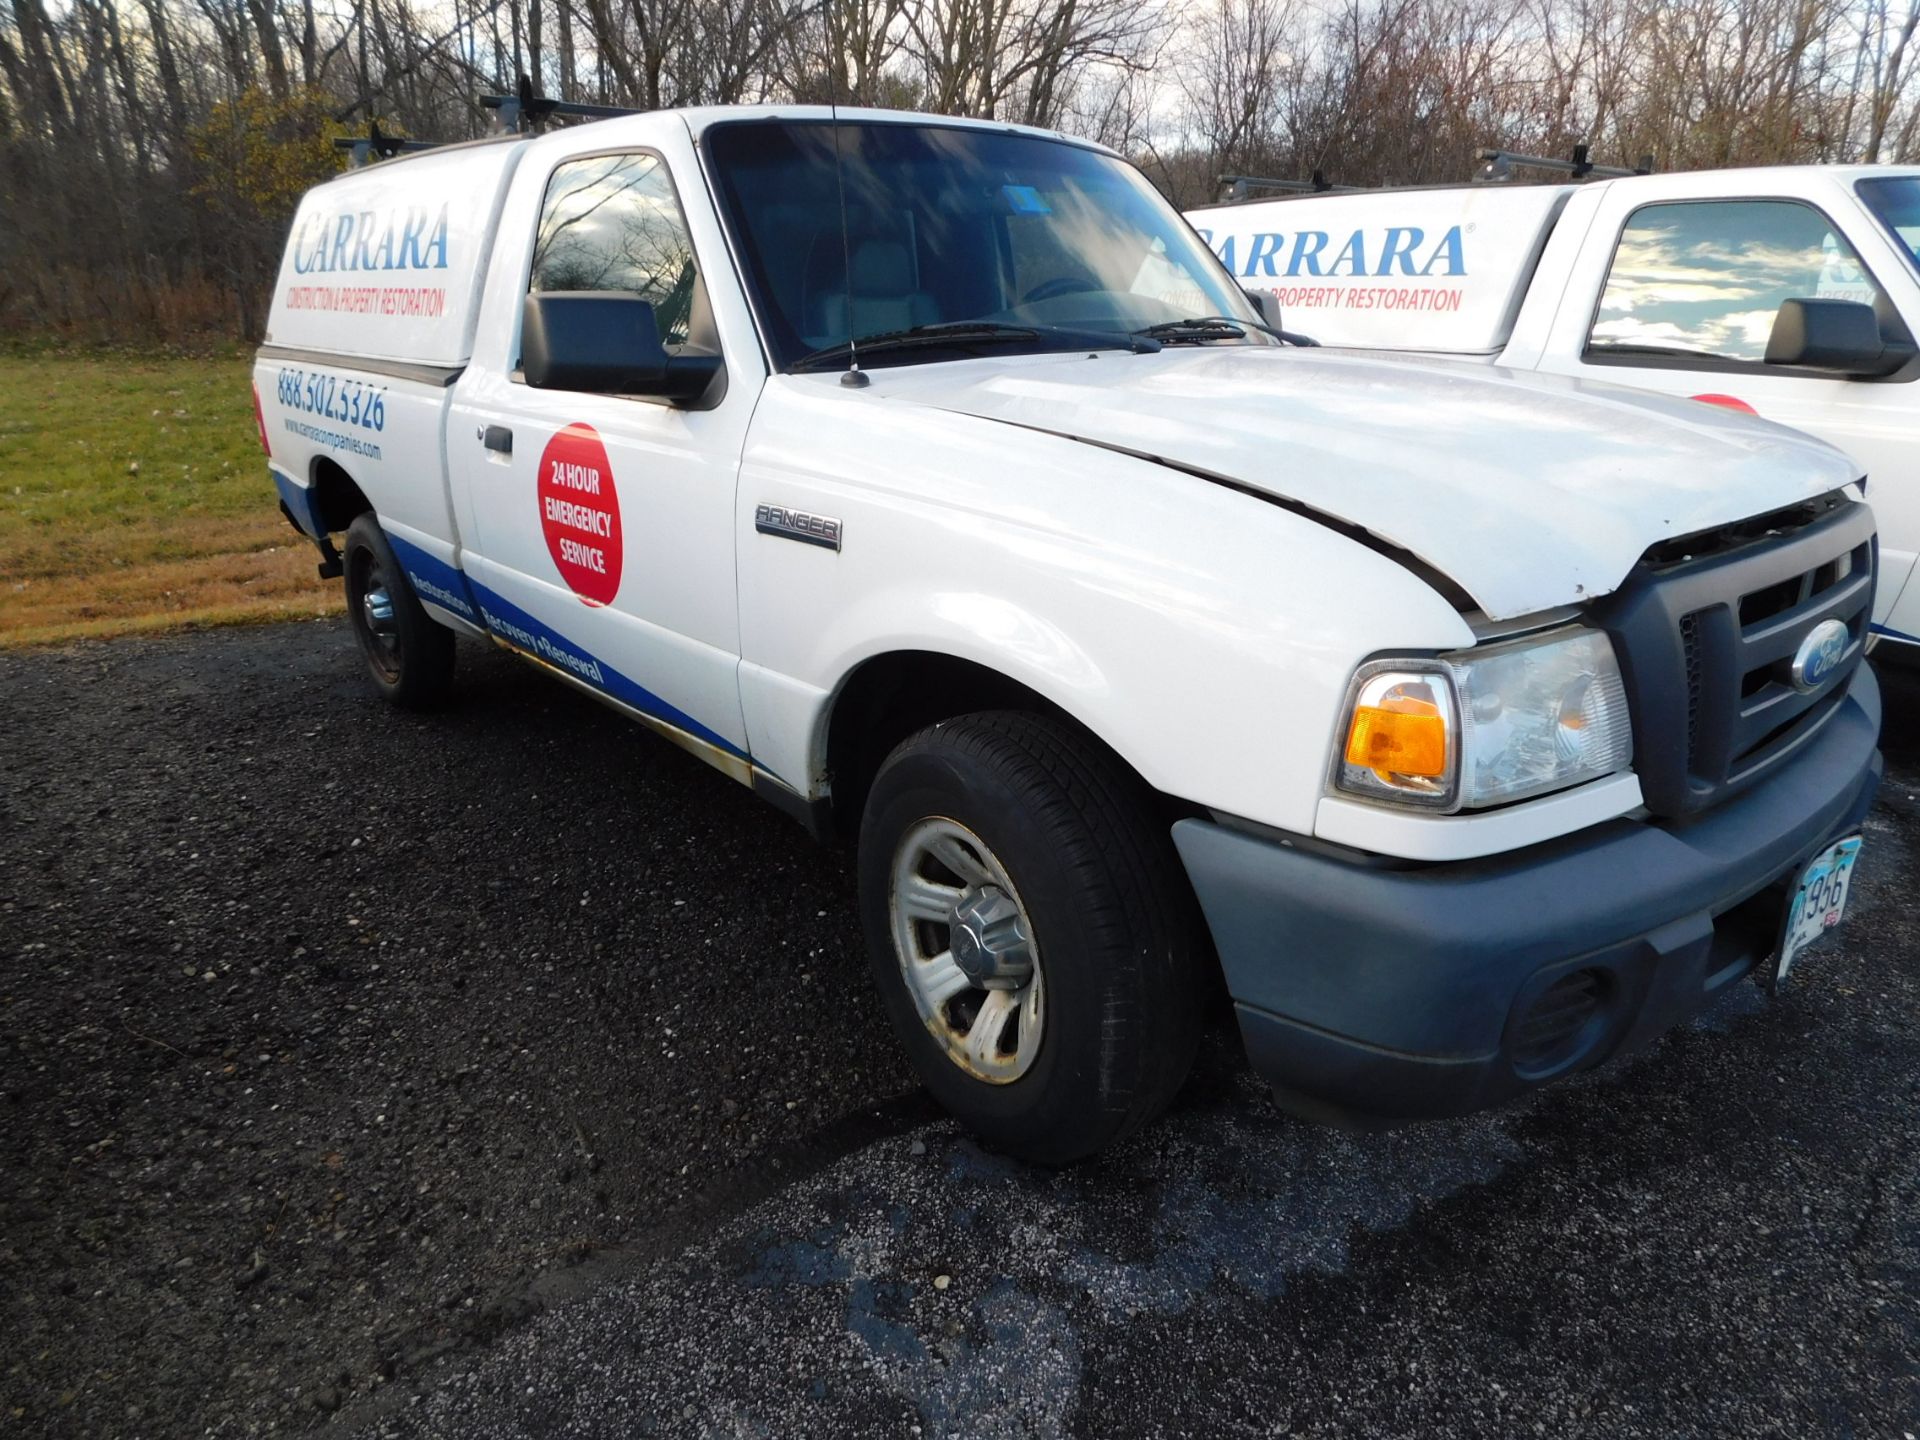 2009 Ford Ranger Pickup, VIN 1FTYR10D79PA62694, Regular Cab, Automatic, AC, AM/FM, Cap, Started with